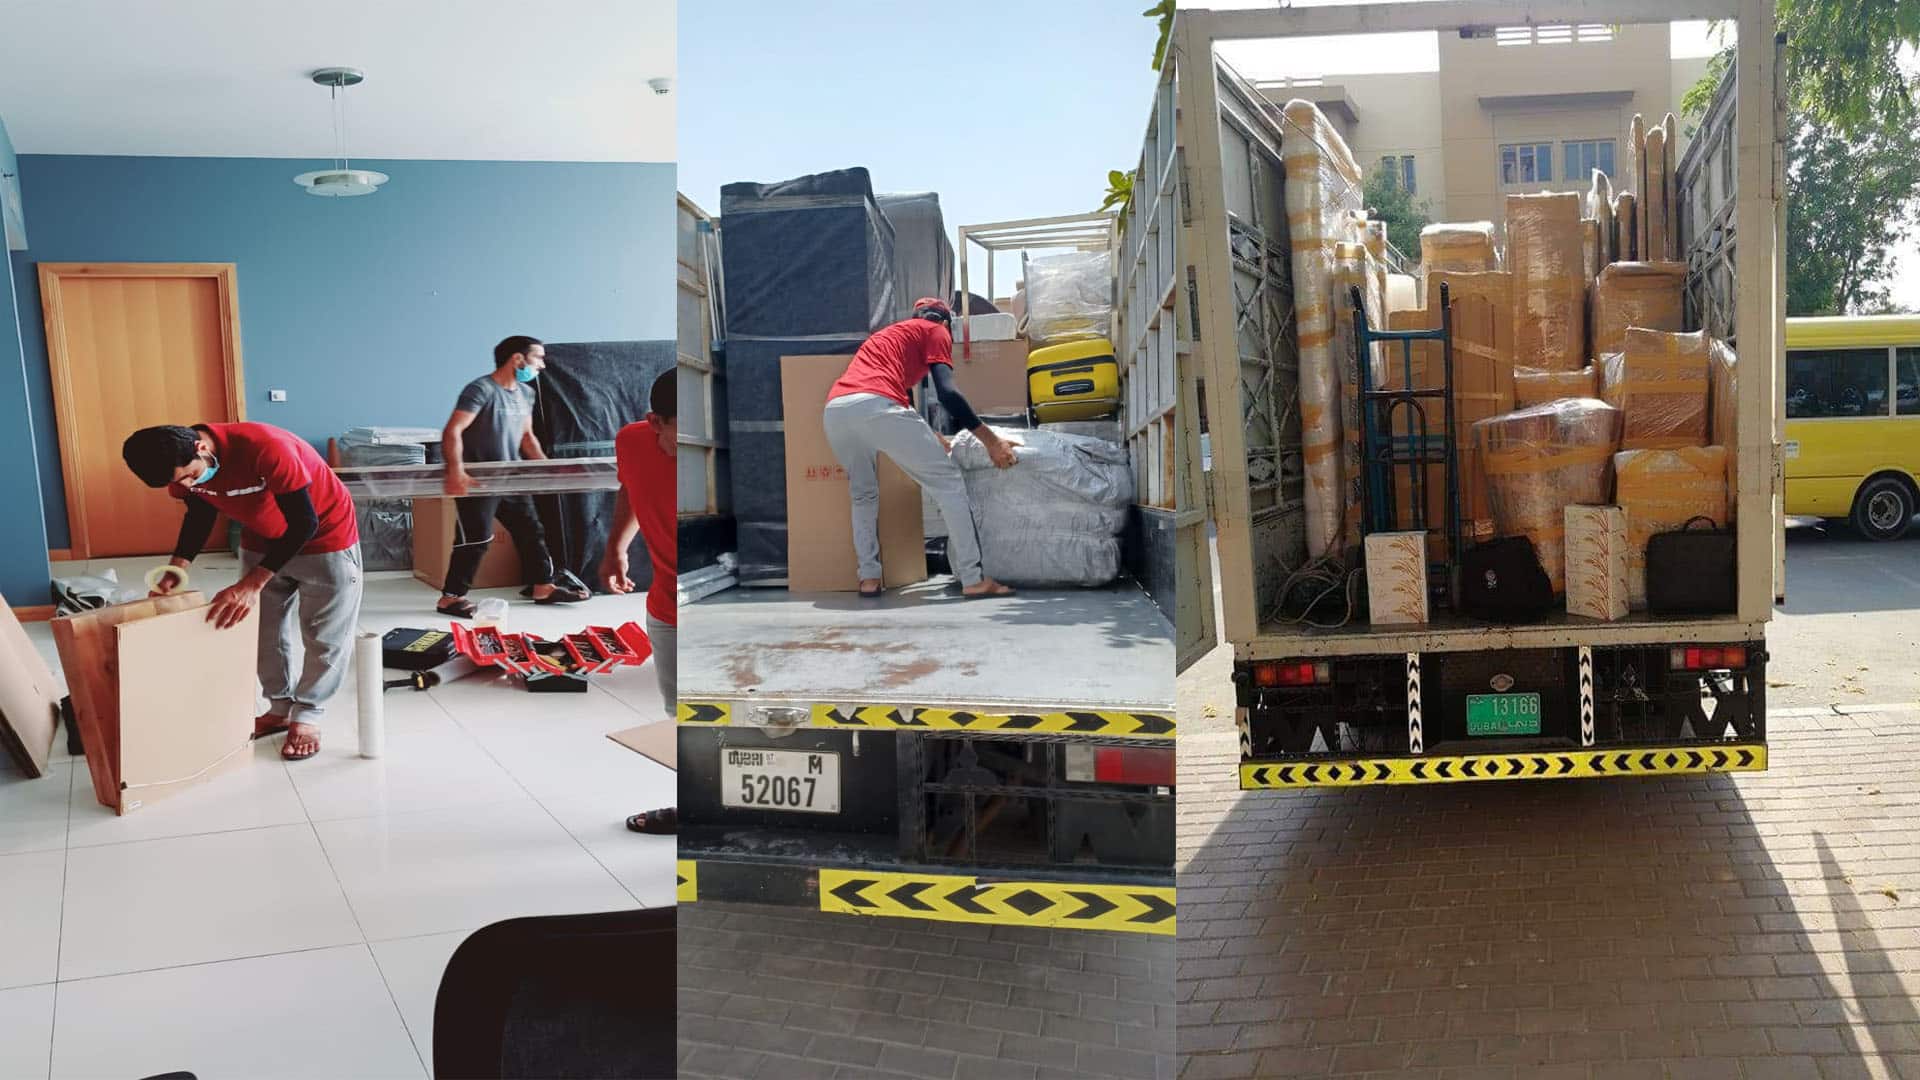 Movers and Packers in Dubai, Movers and Packers Dubai